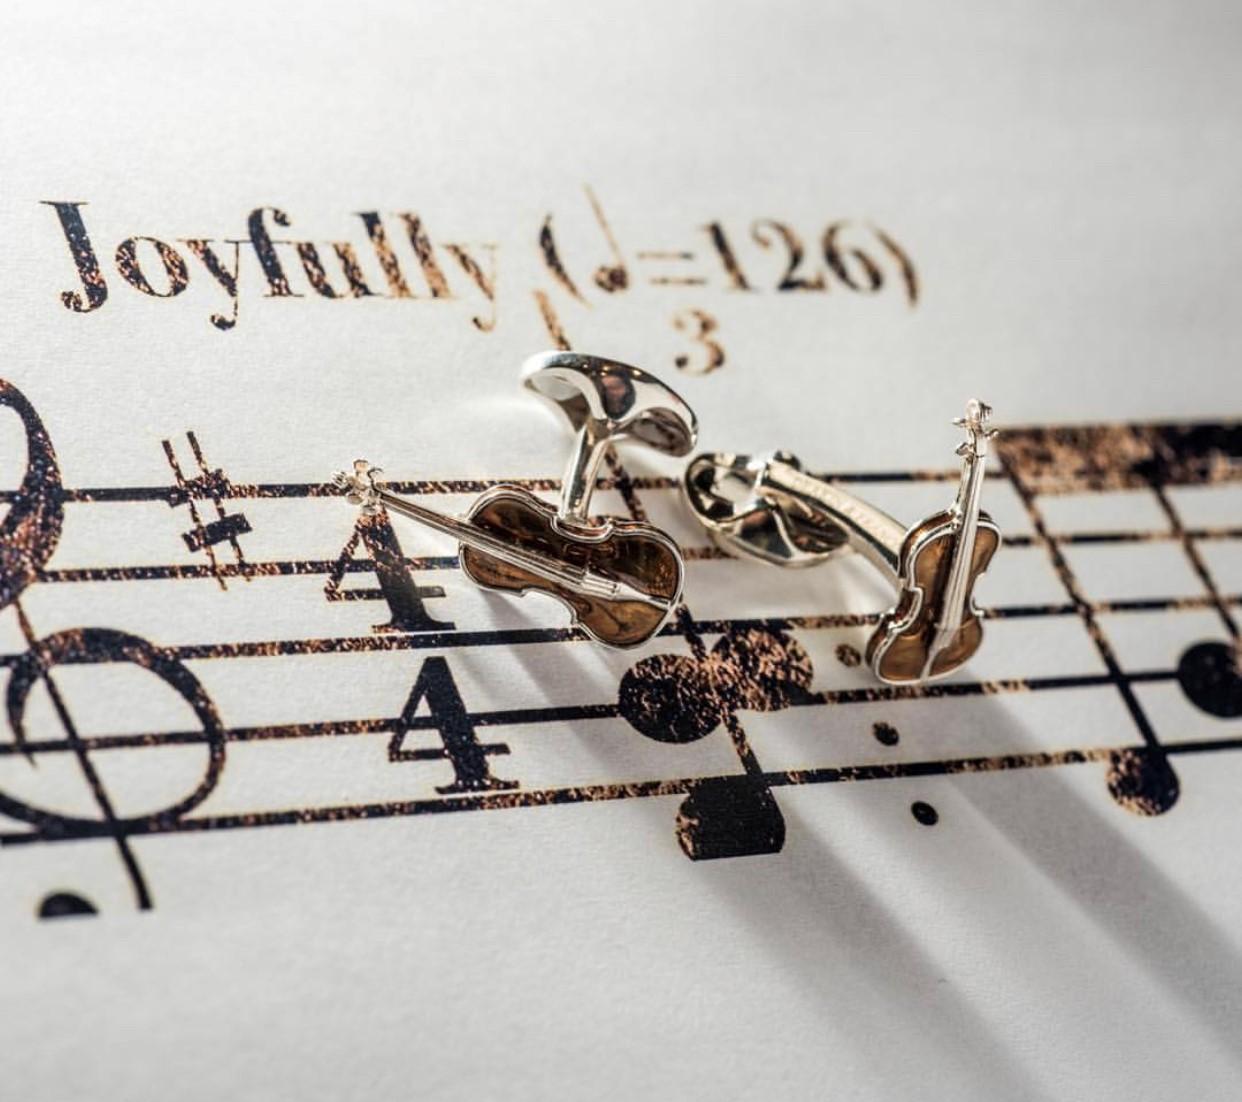 DEAKIN & FRANCIS, Piccadilly Arcade, London

Pull on his heart strings with these elegant violin cufflinks.

The heart of the orchestra, the violin is a wonderful classical instrument. And these music inspired, sterling silver cufflinks will add a